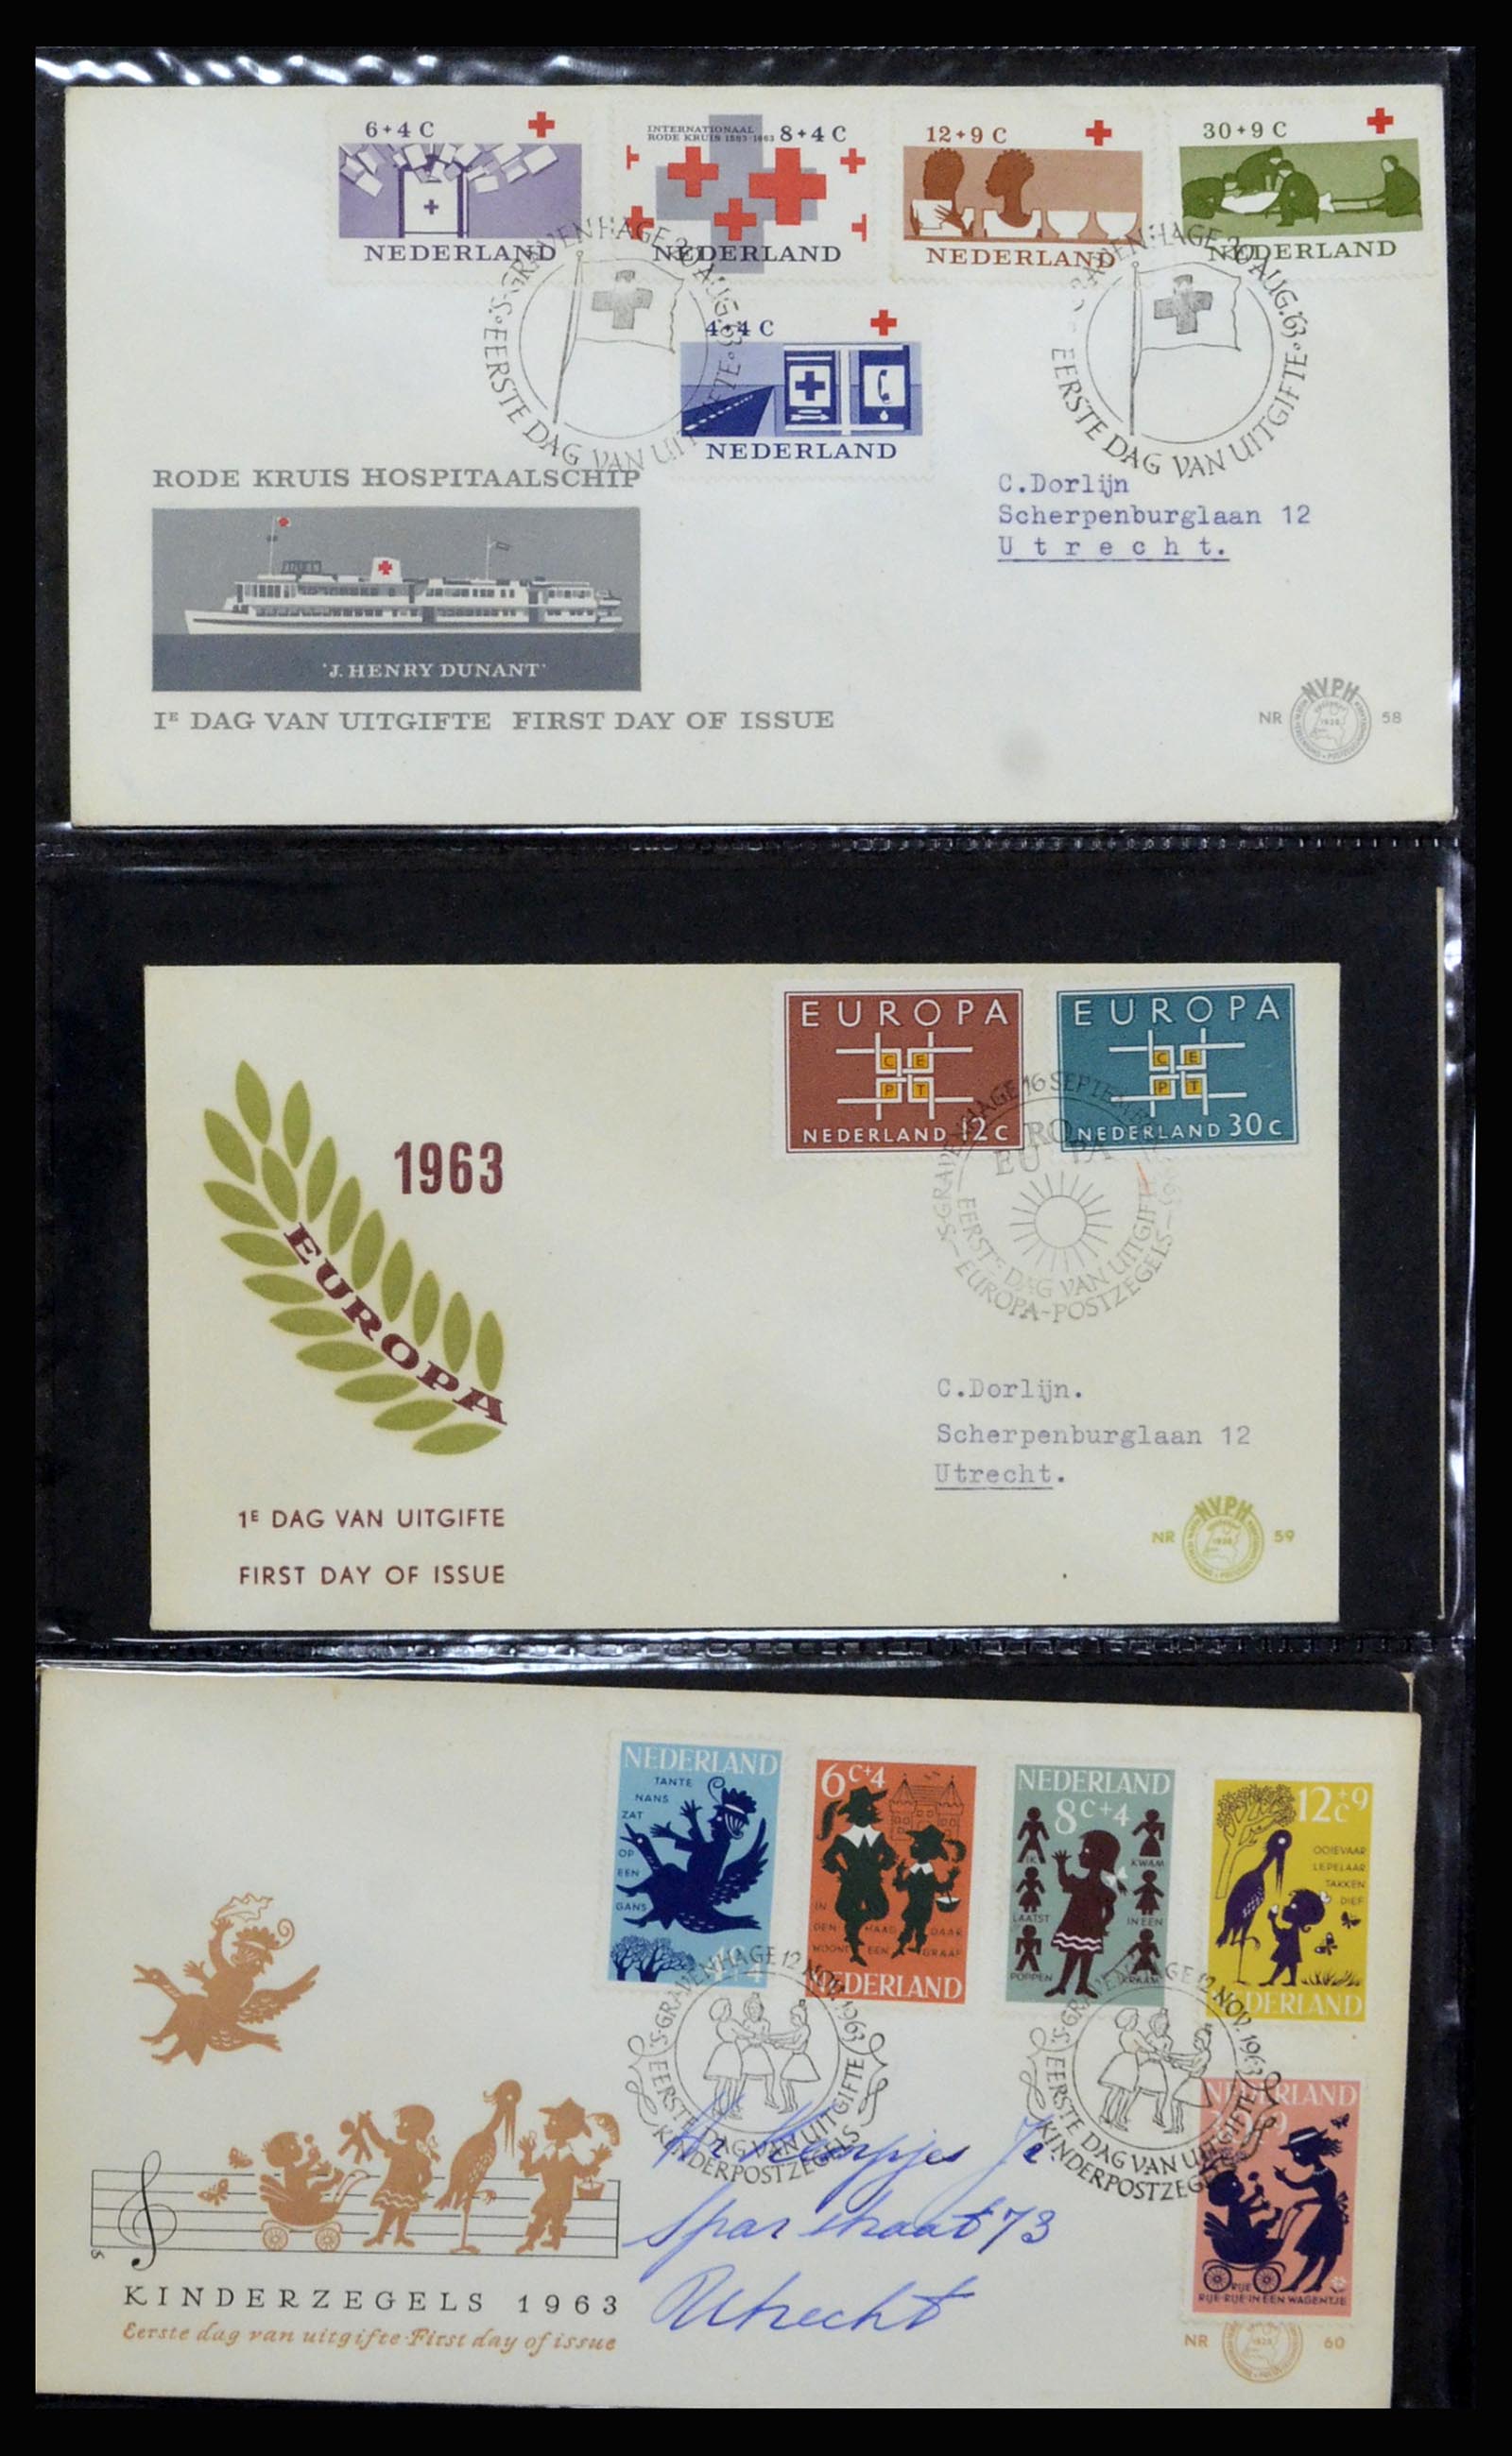 37197 021 - Stamp collection 37197 Netherlands FDC's 1950-2004.